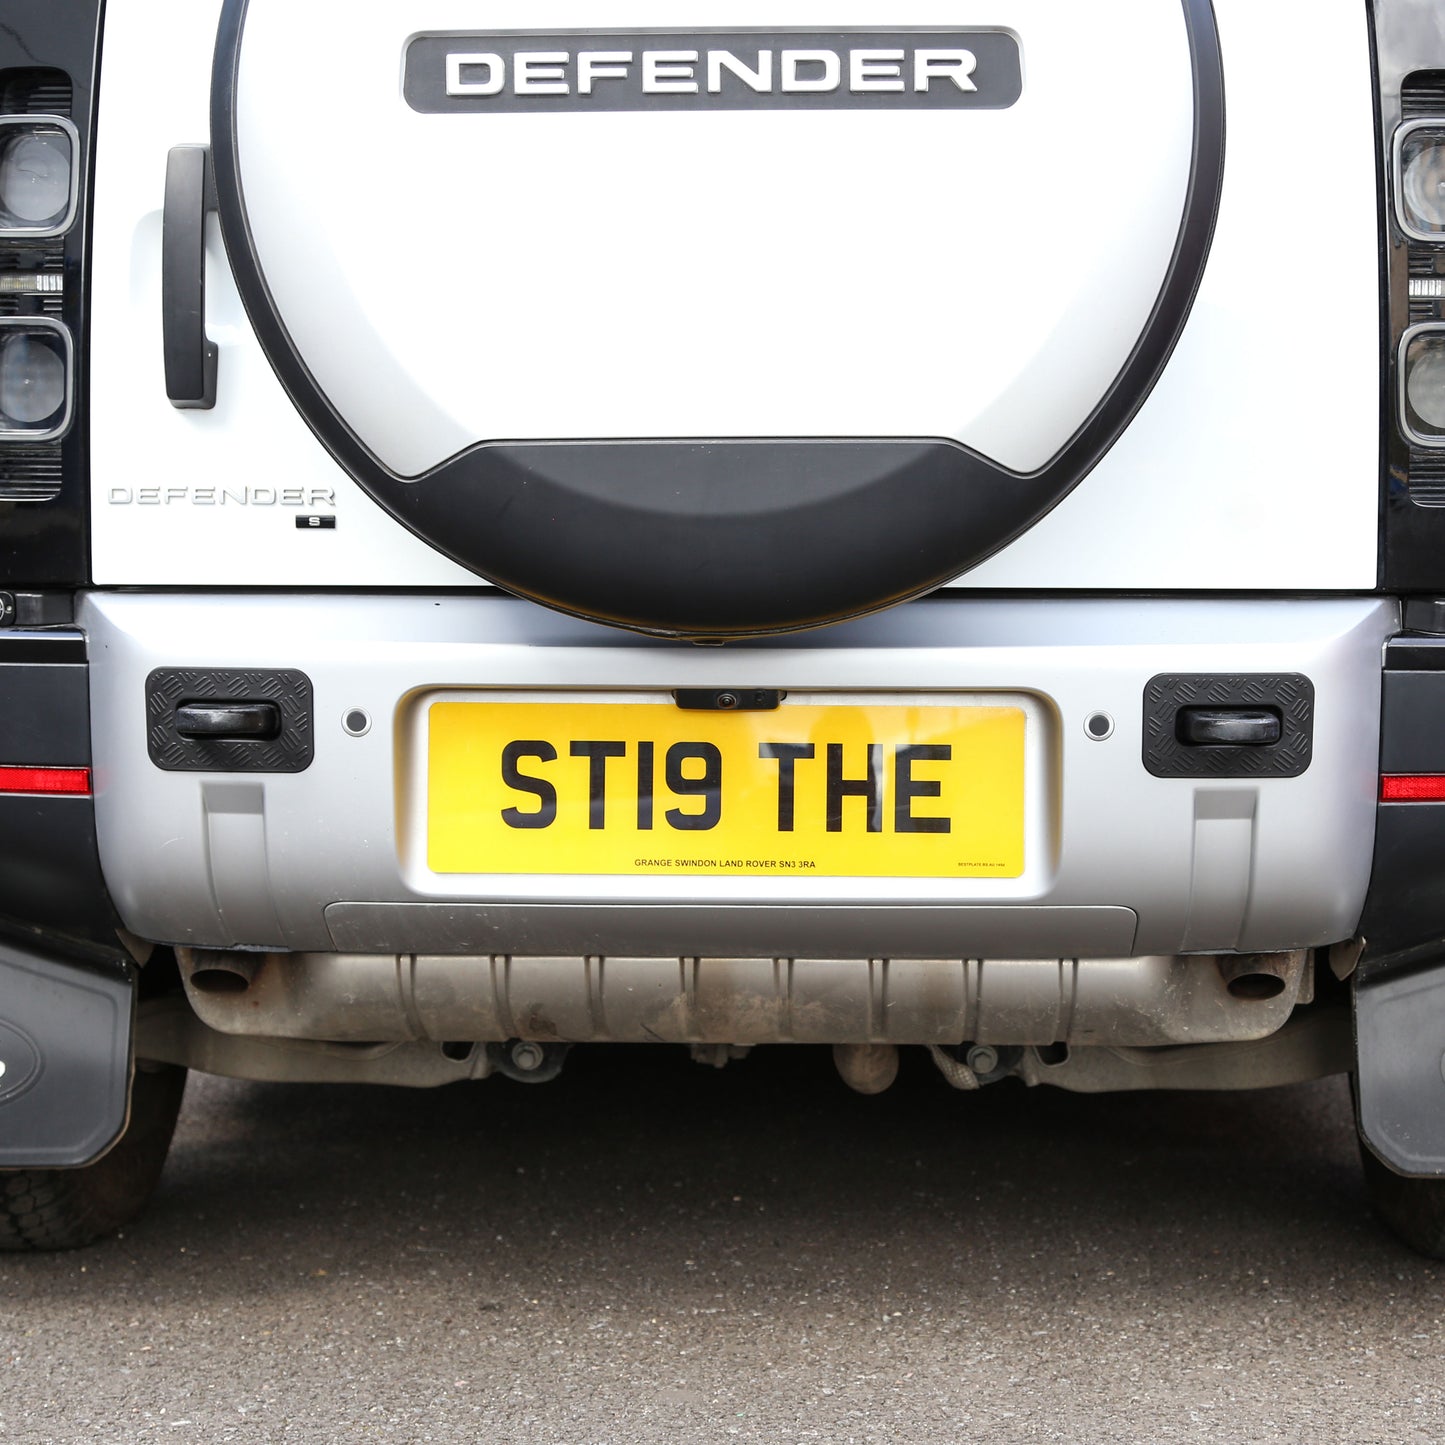 Tow Loop Upgrade Kit D - Black Loops + Chequer Surrounds (Slim Type) for Land Rover Defender L663